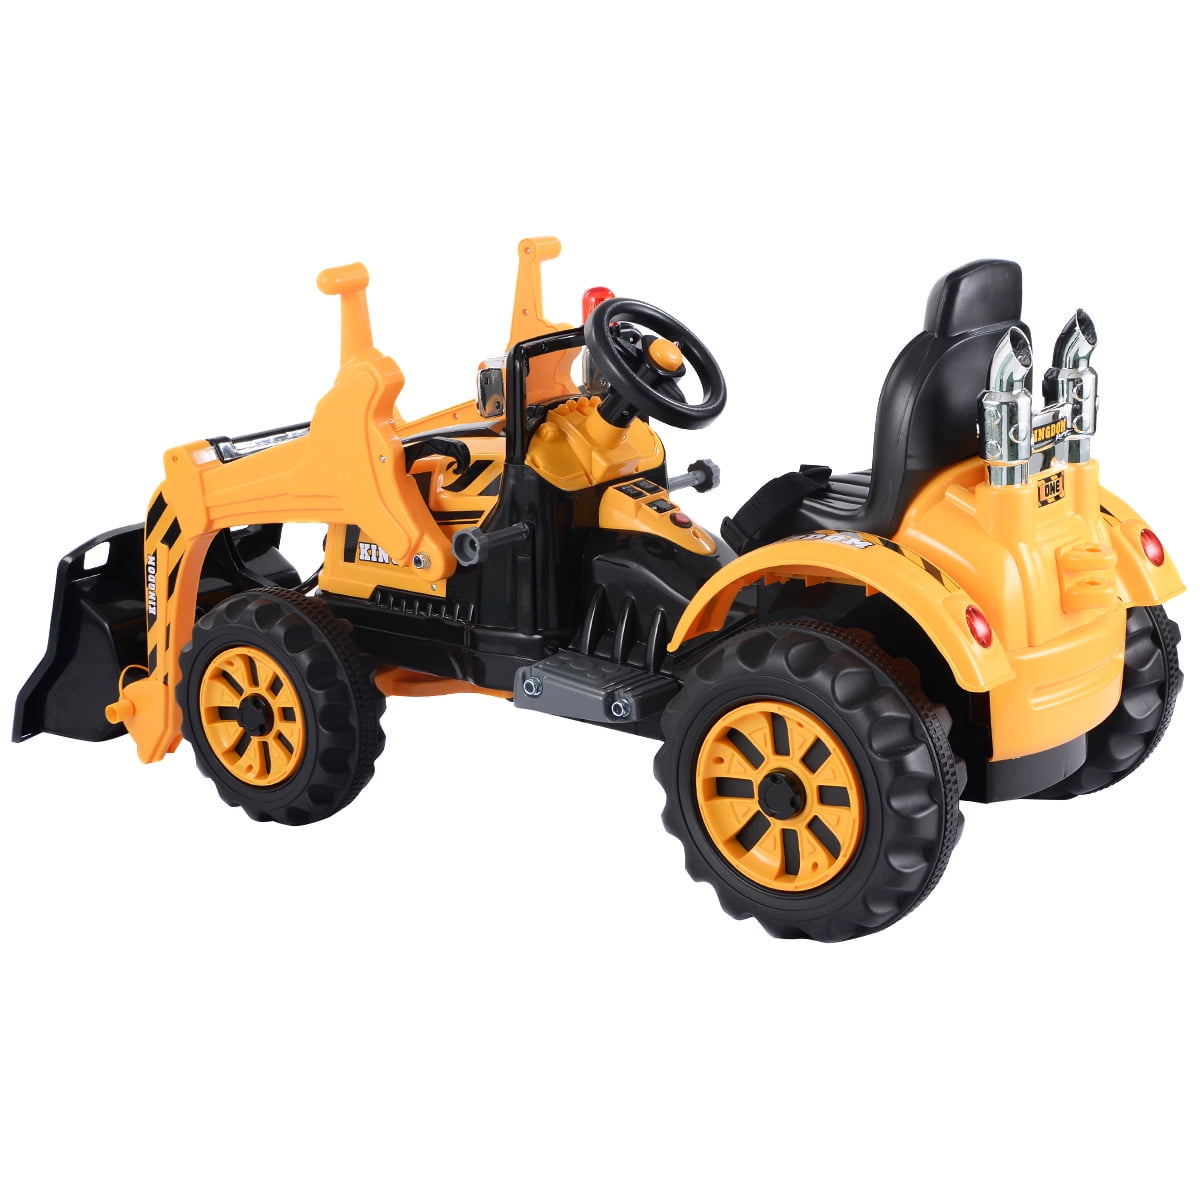 DOLU YELLOW KIDS PEDAL FARM TRACTOR DIGGER AGE 3 CHILDS RIDE ON TOY 